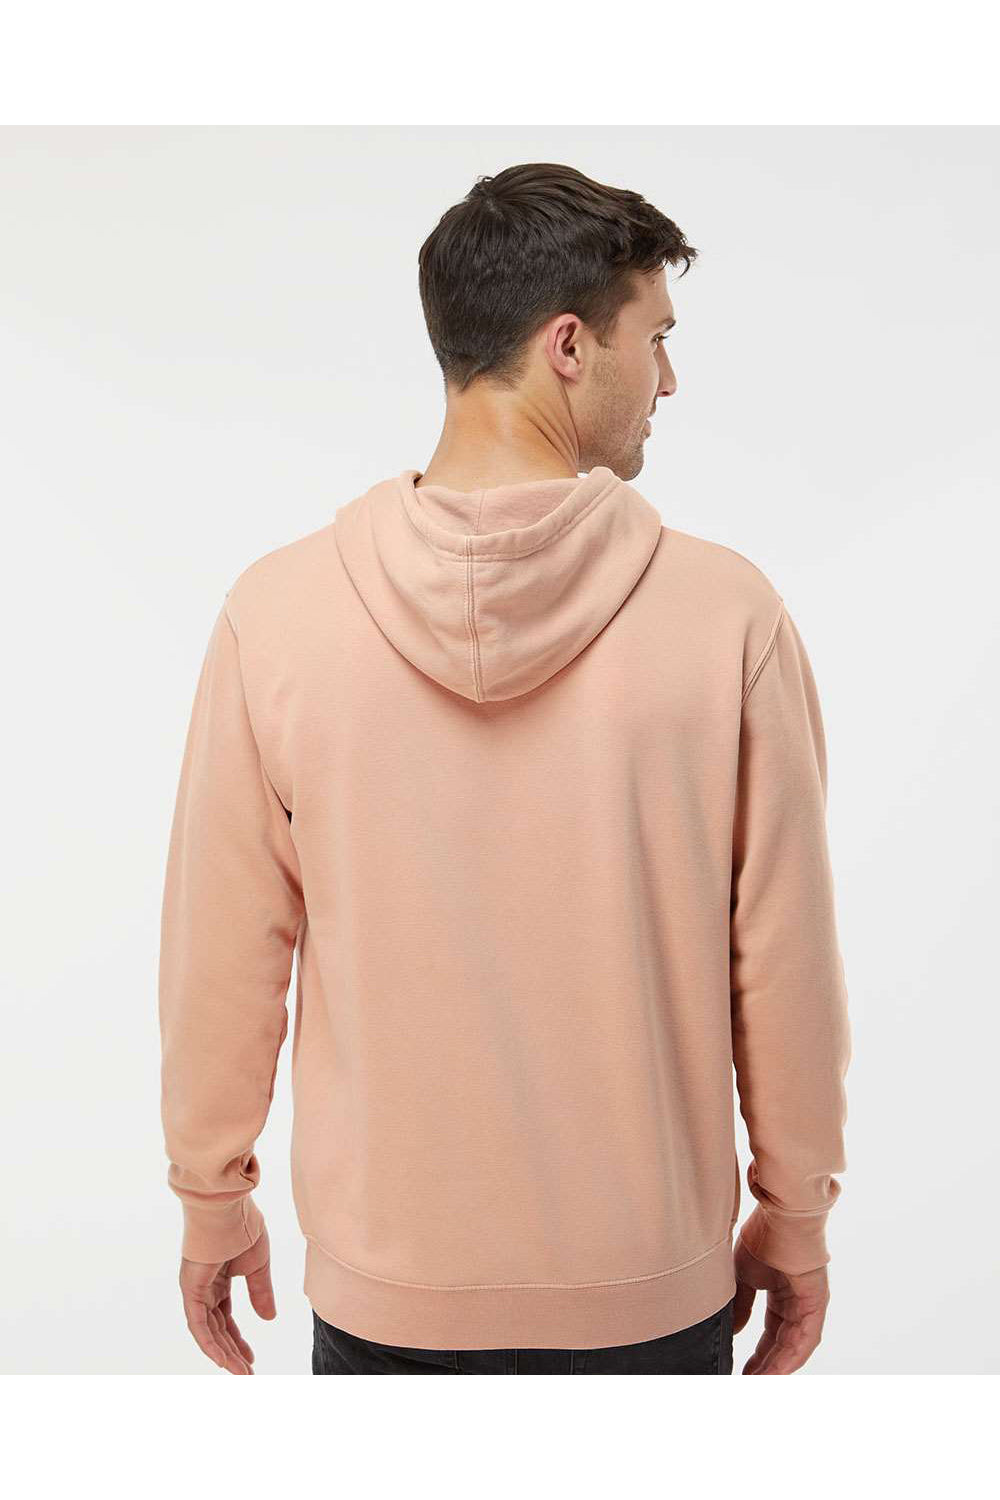 Independent Trading Co. PRM4500 Mens Pigment Dyed Hooded Sweatshirt Hoodie Dusty Pink Model Back